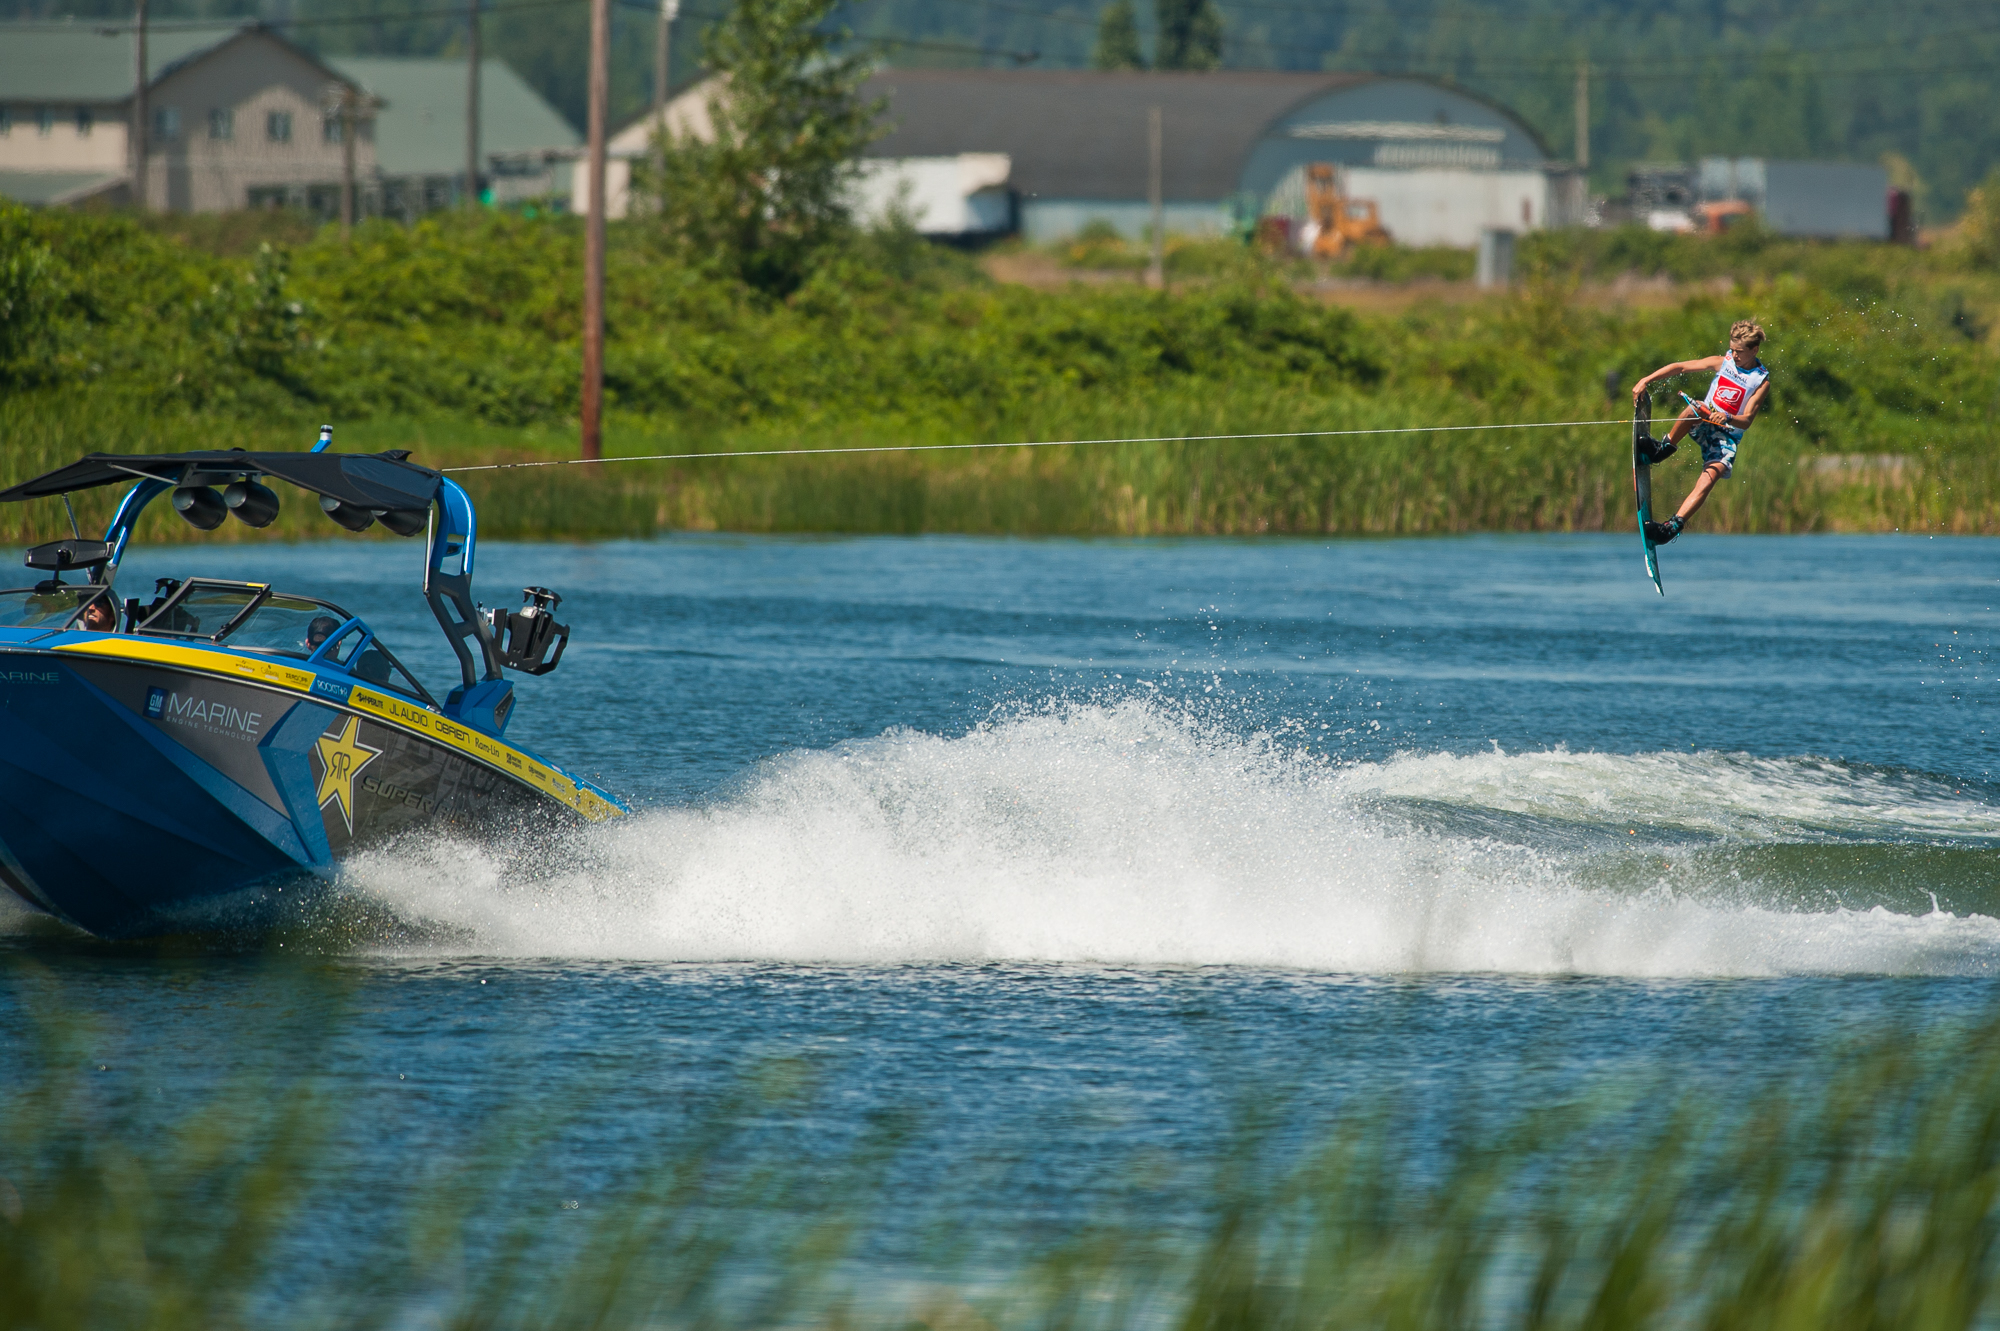 TOP AMATEURS EXCEL BEHIND THE SUPER AIR NAUTIQUE G23 ON DAY ONE OF THE 2018 NAUTIQUE WWA WAKEBOARD NATIONAL CHAMPIONSHIPS PRESENTED BY ROCKSTAR ENERGY  hq image